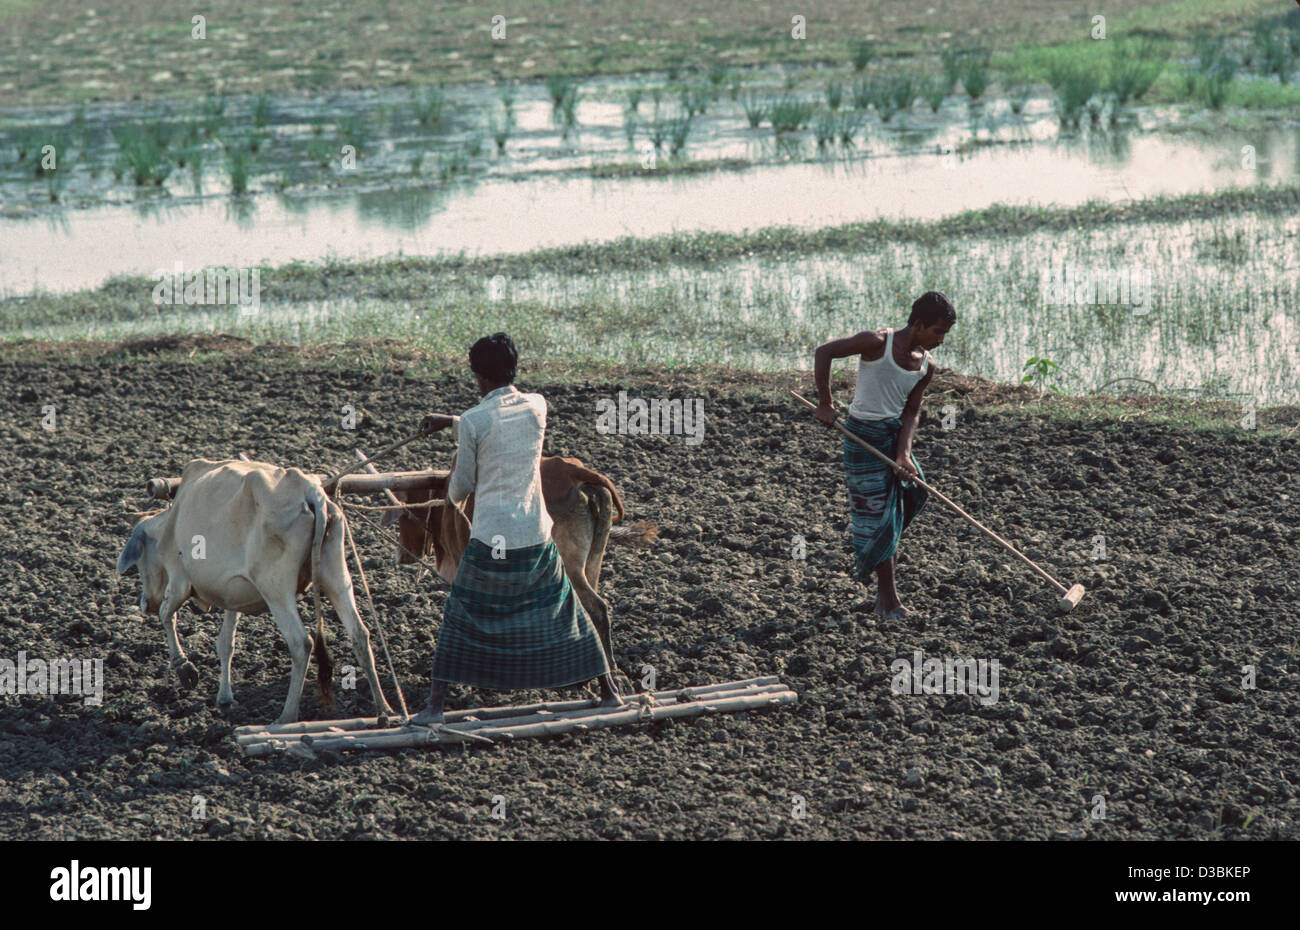 Farm labourer breaking up the soil with a board harrow pulled by oxen. Another farm worker is breaking up the soil by hand. Tangail, Bangladesh Stock Photo